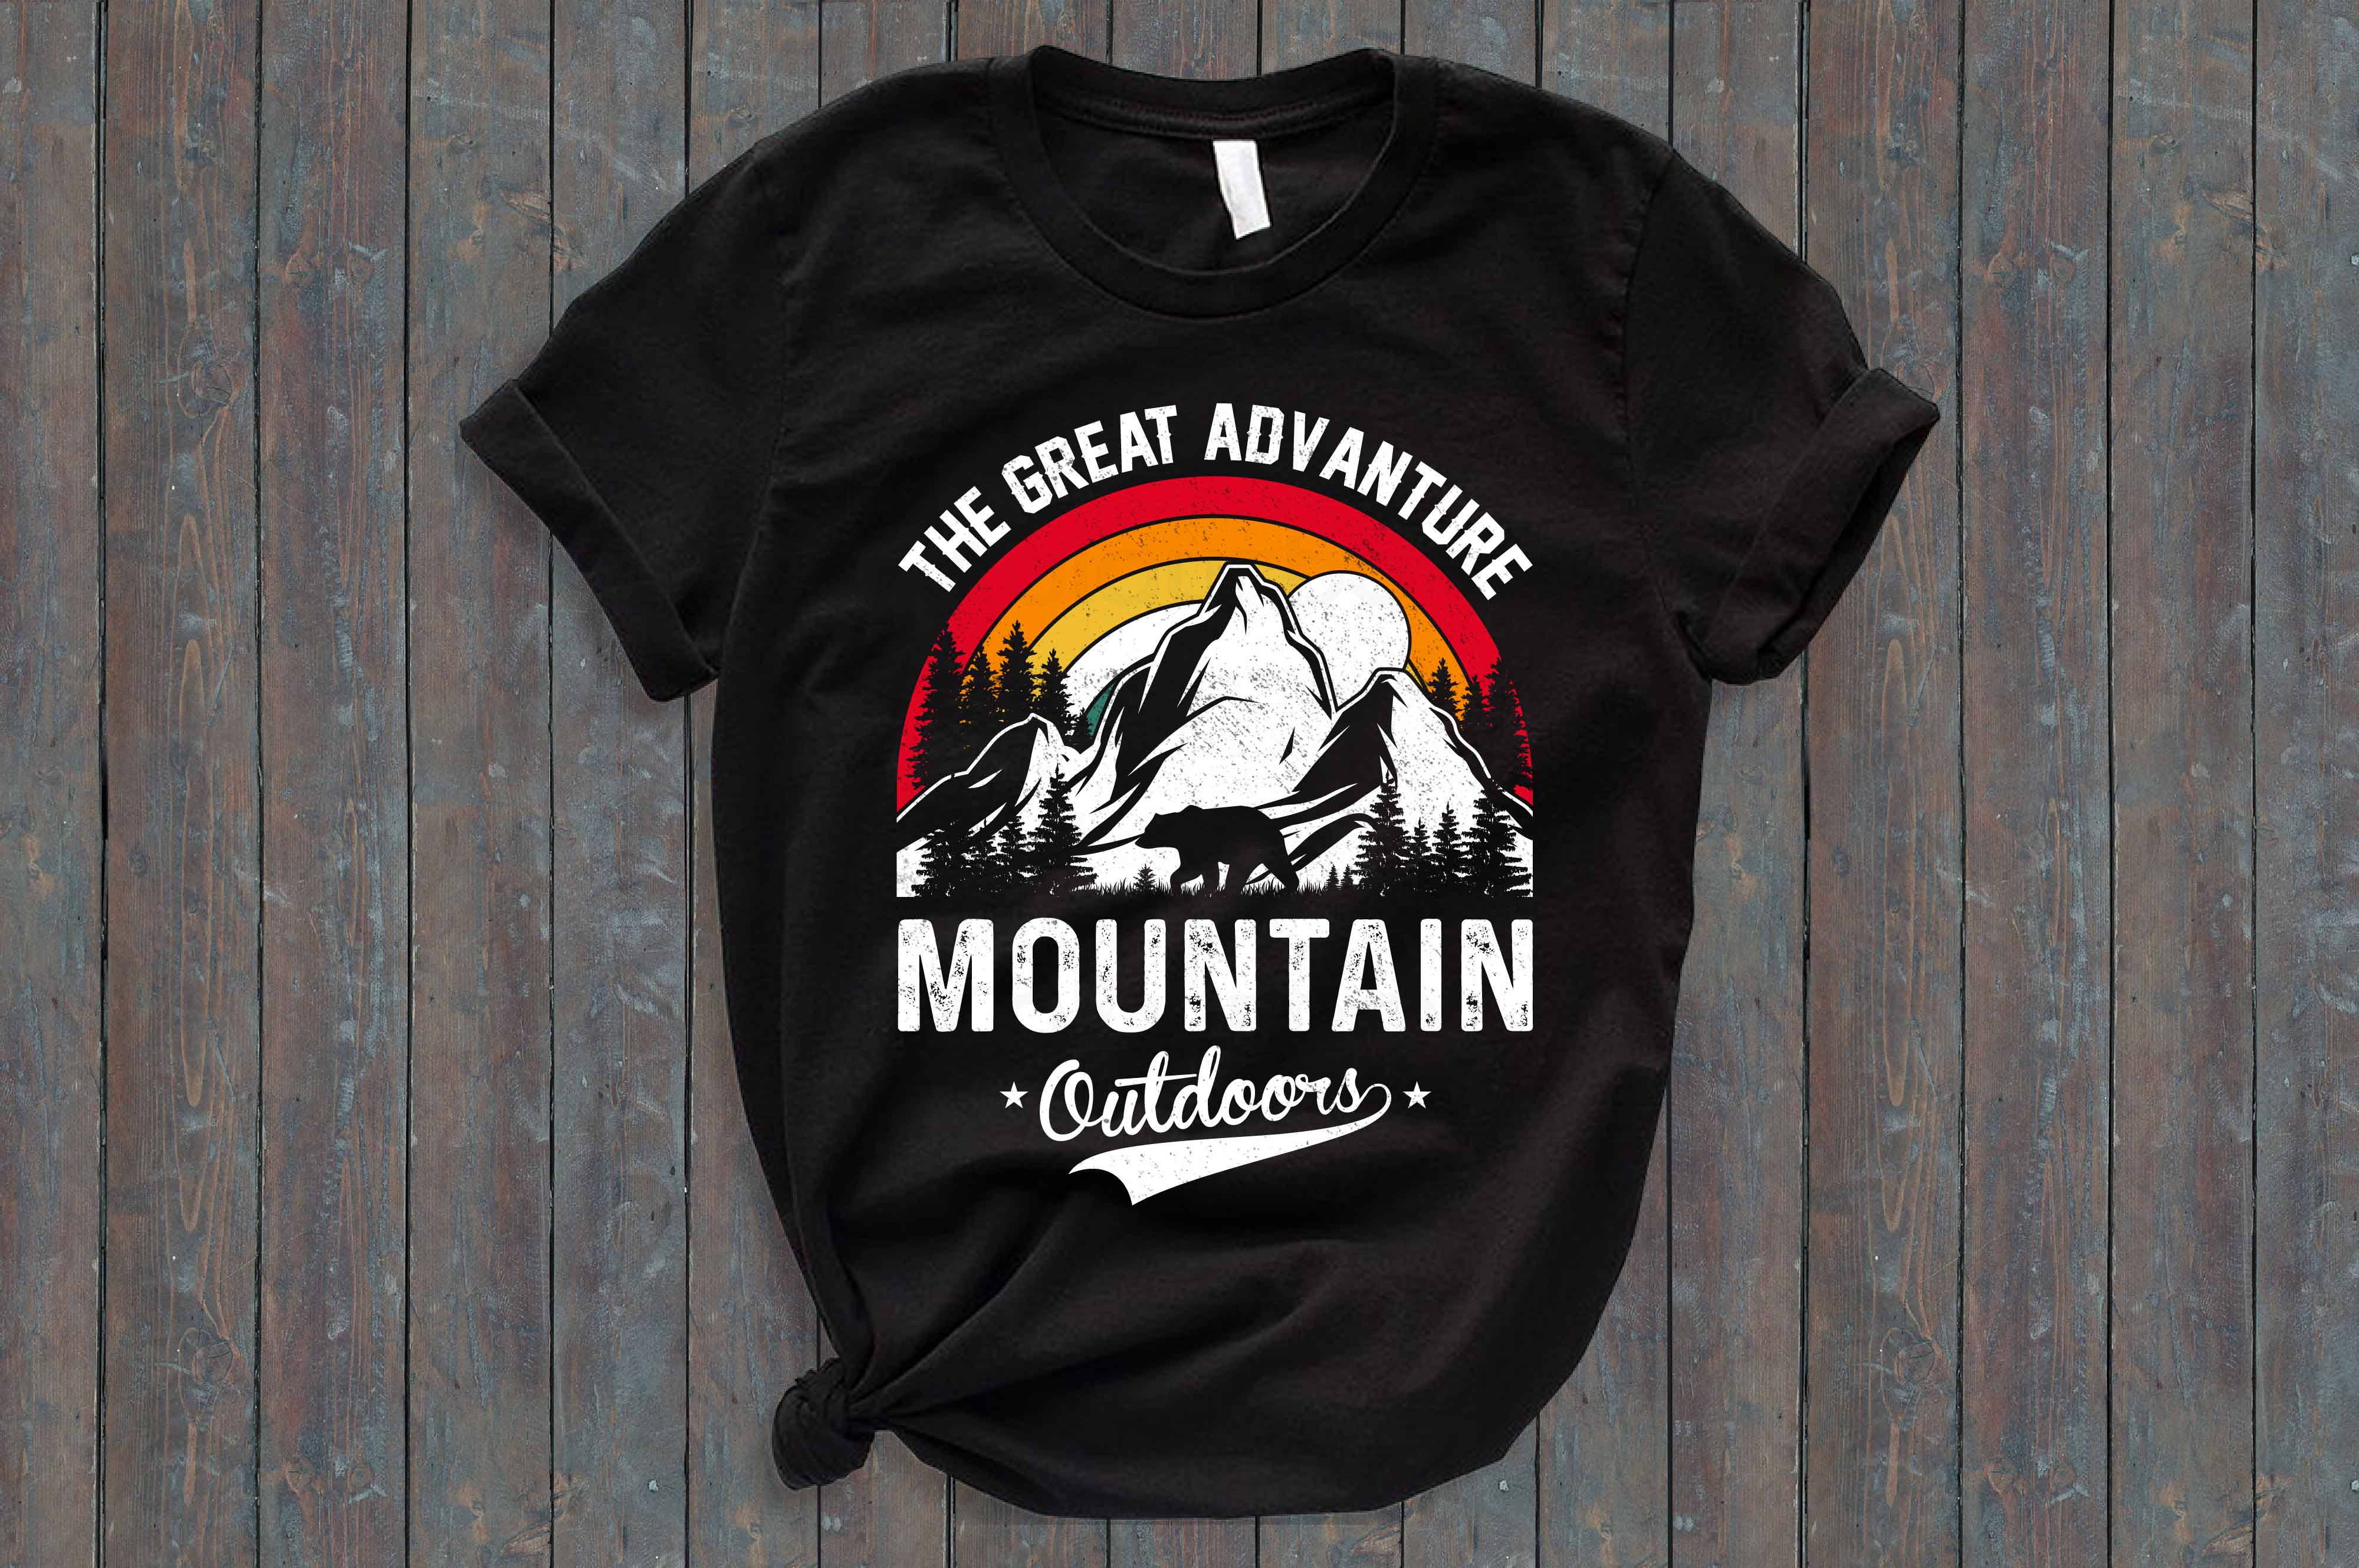 Black t - shirt that says the great adventure mountain climbers.